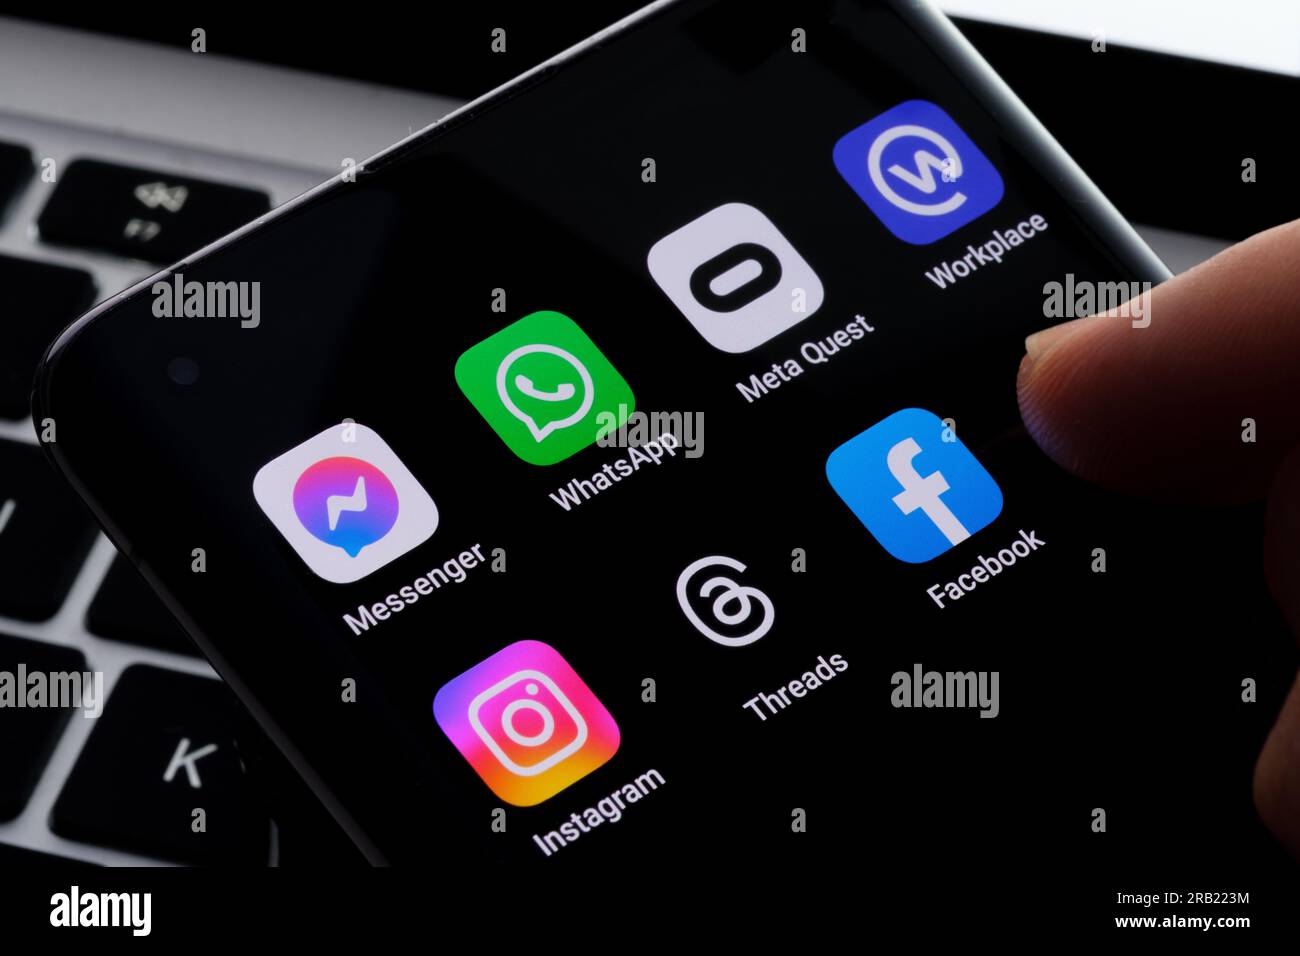 All Meta Platforms apps on the screen of smartphone Facebook, Instagram, WhatsApp, Messenger, Threads, Meta Quest, Workplace. Concept Stafford, United Stock Photo